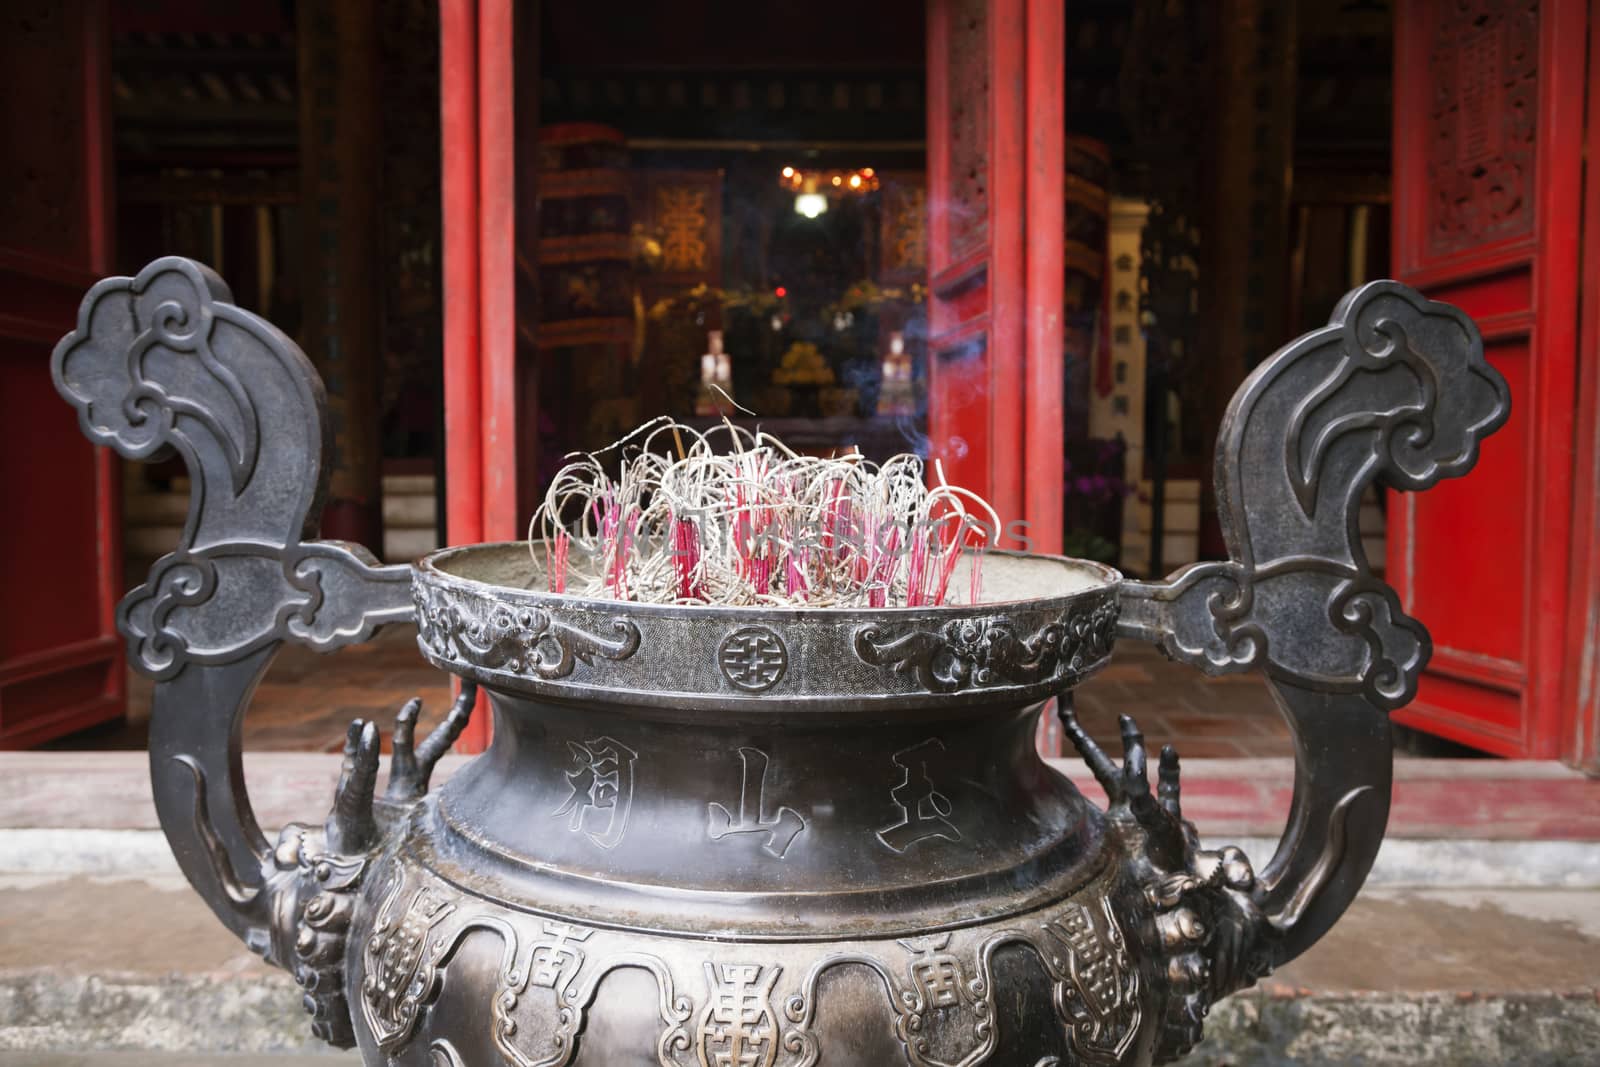 Incence burner in Ngoc Son temple, Hanoi by Goodday